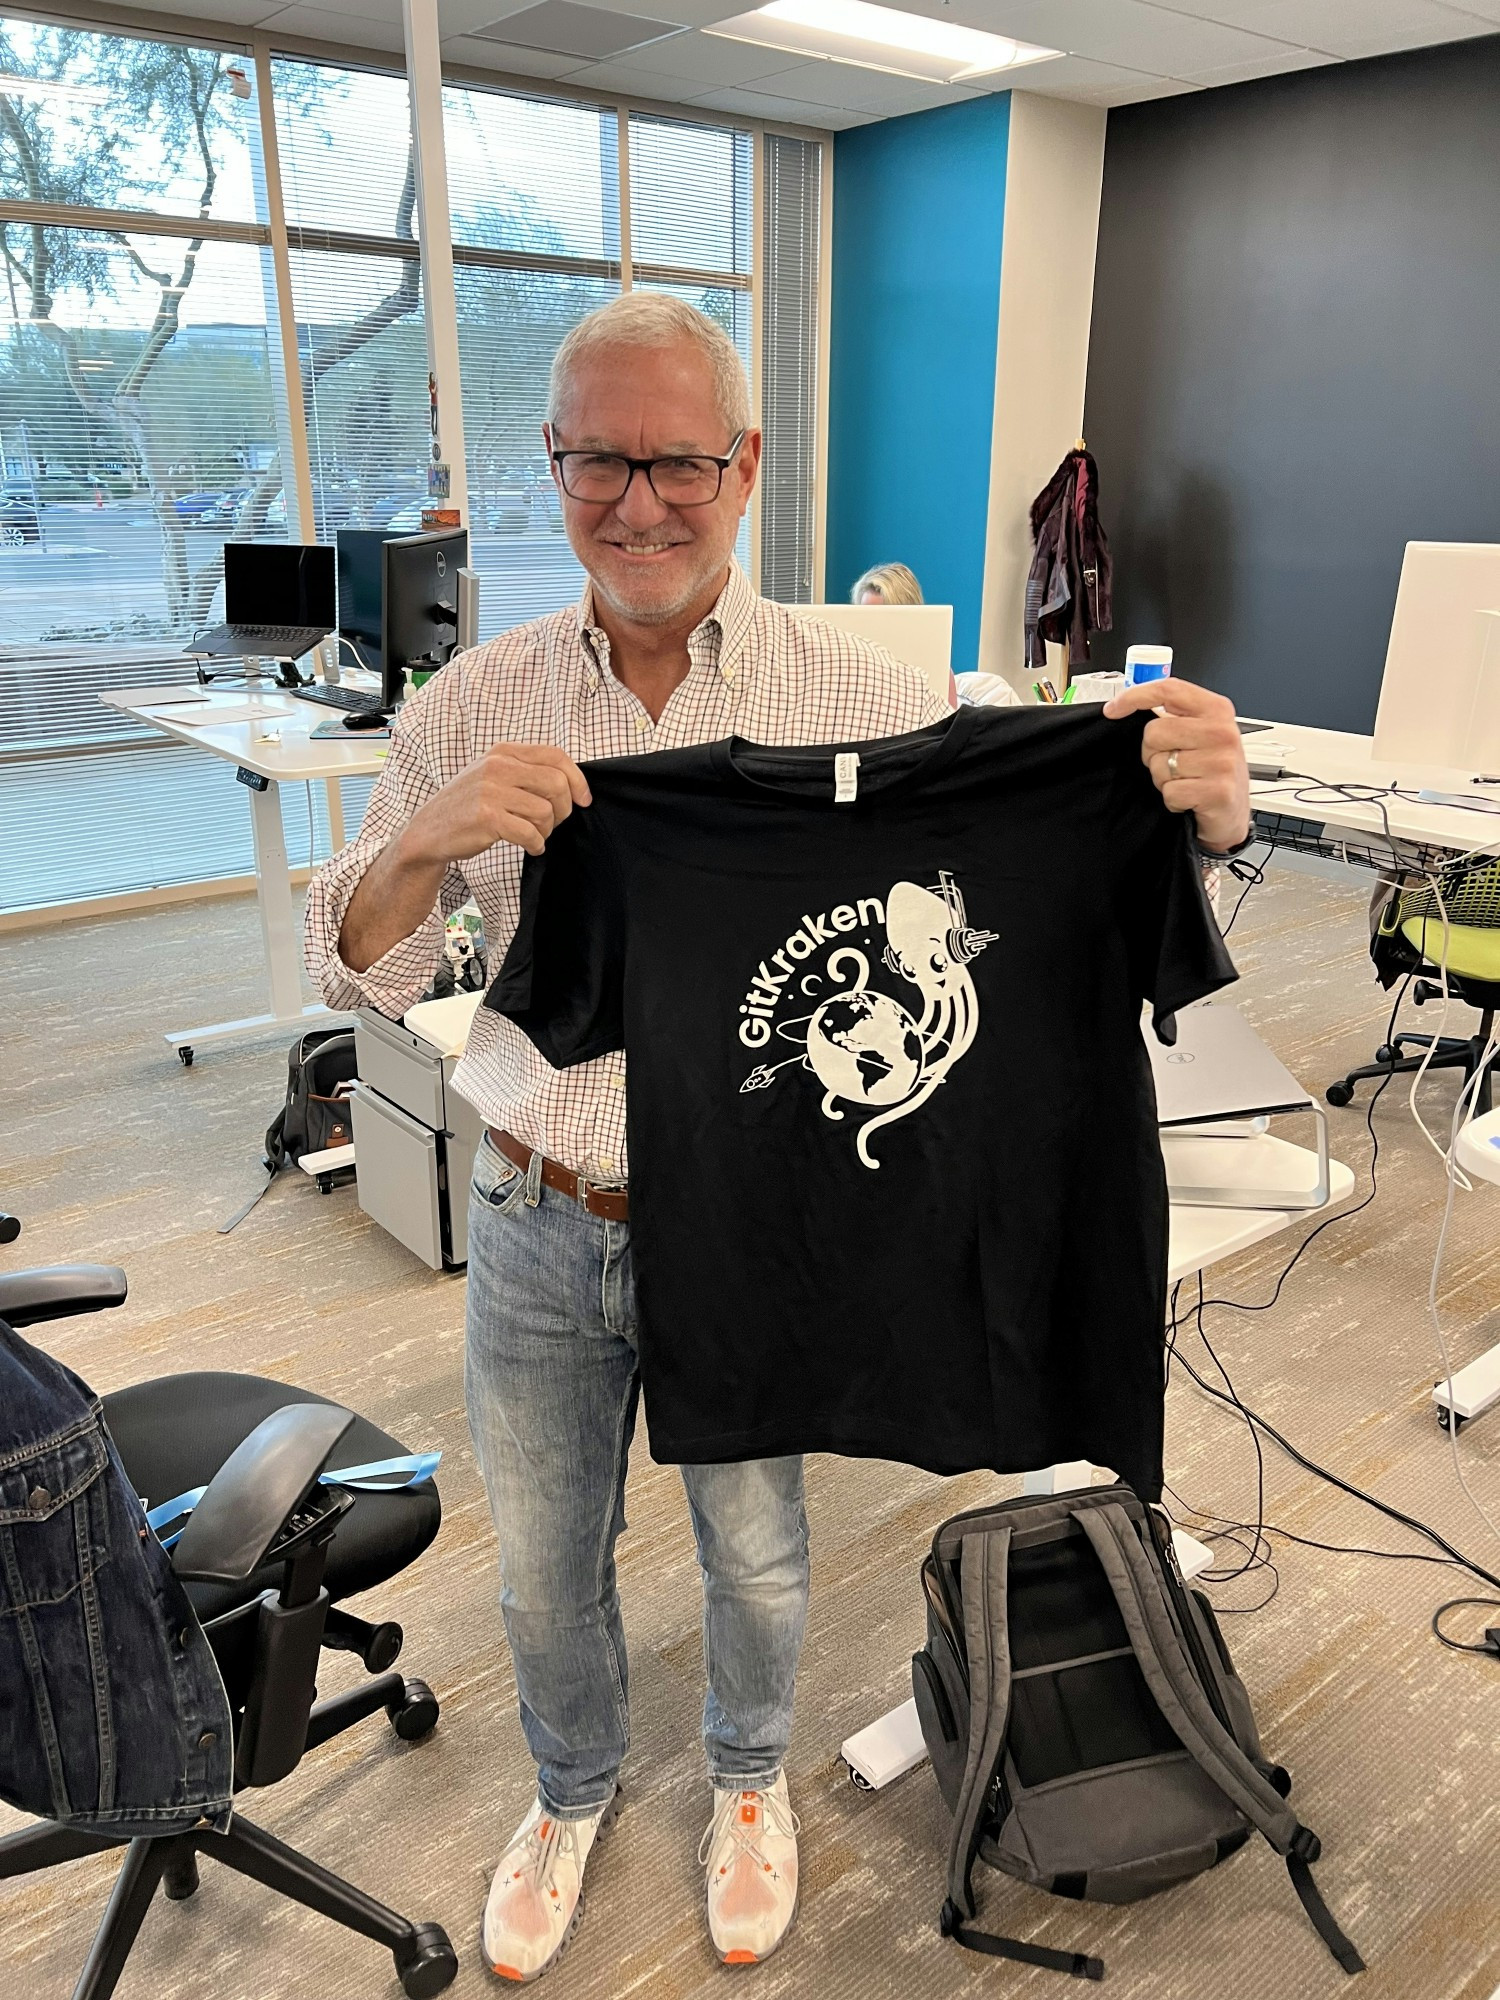 New swag! Our CFO showing off our new t-shirts